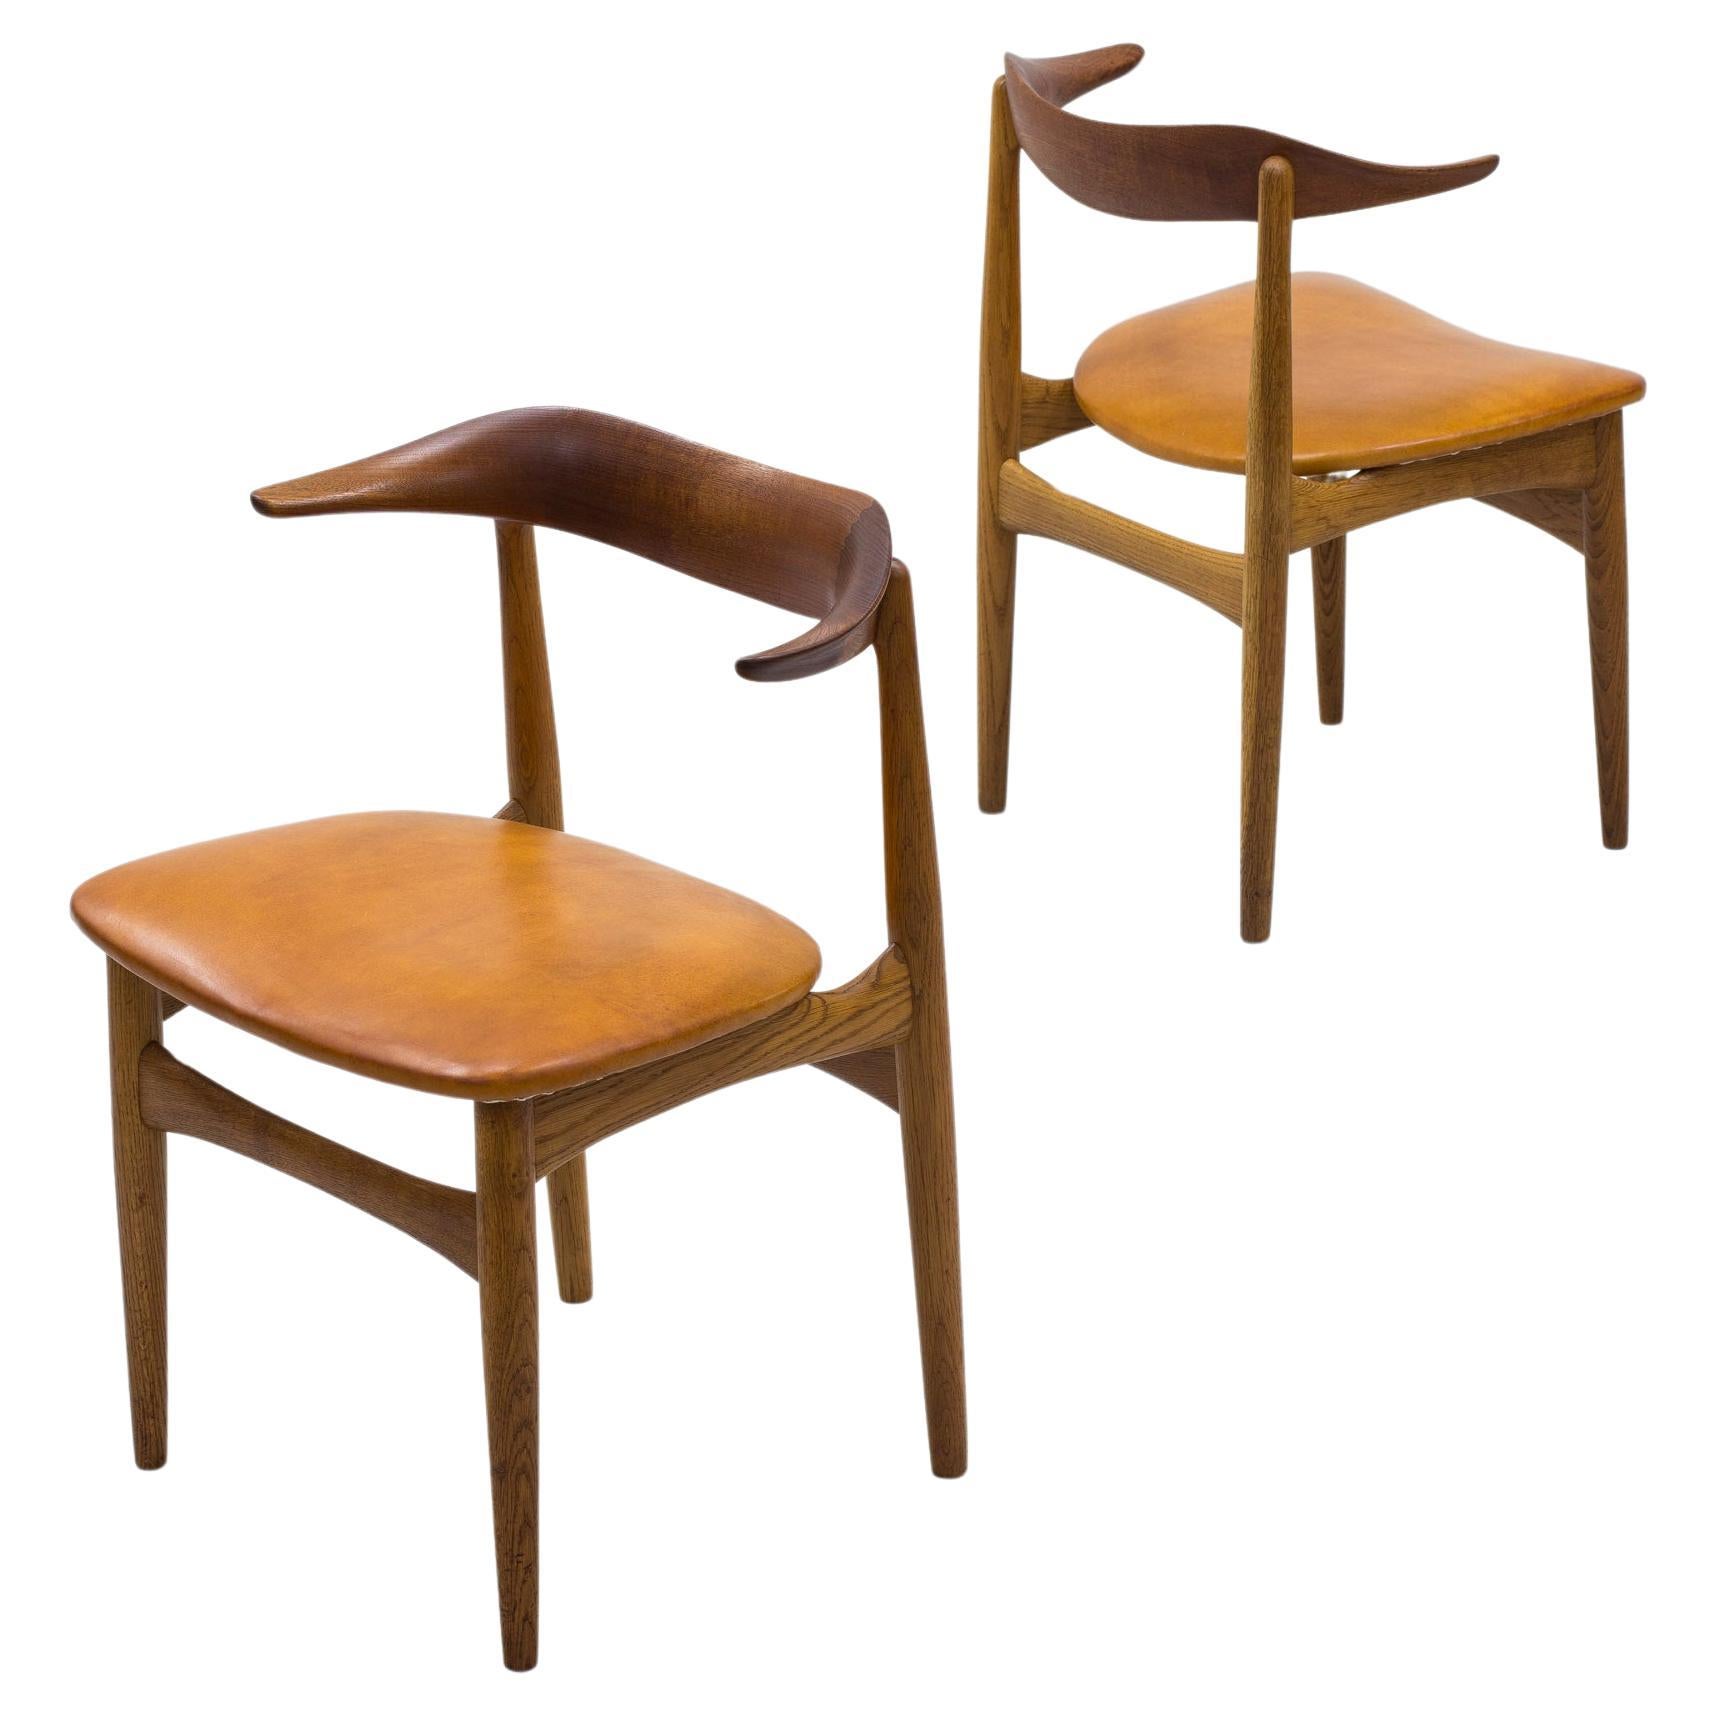 Sculptural "Cow horn" chairs in teak and oak by Knud Faerch, Denmark, 1950s For Sale